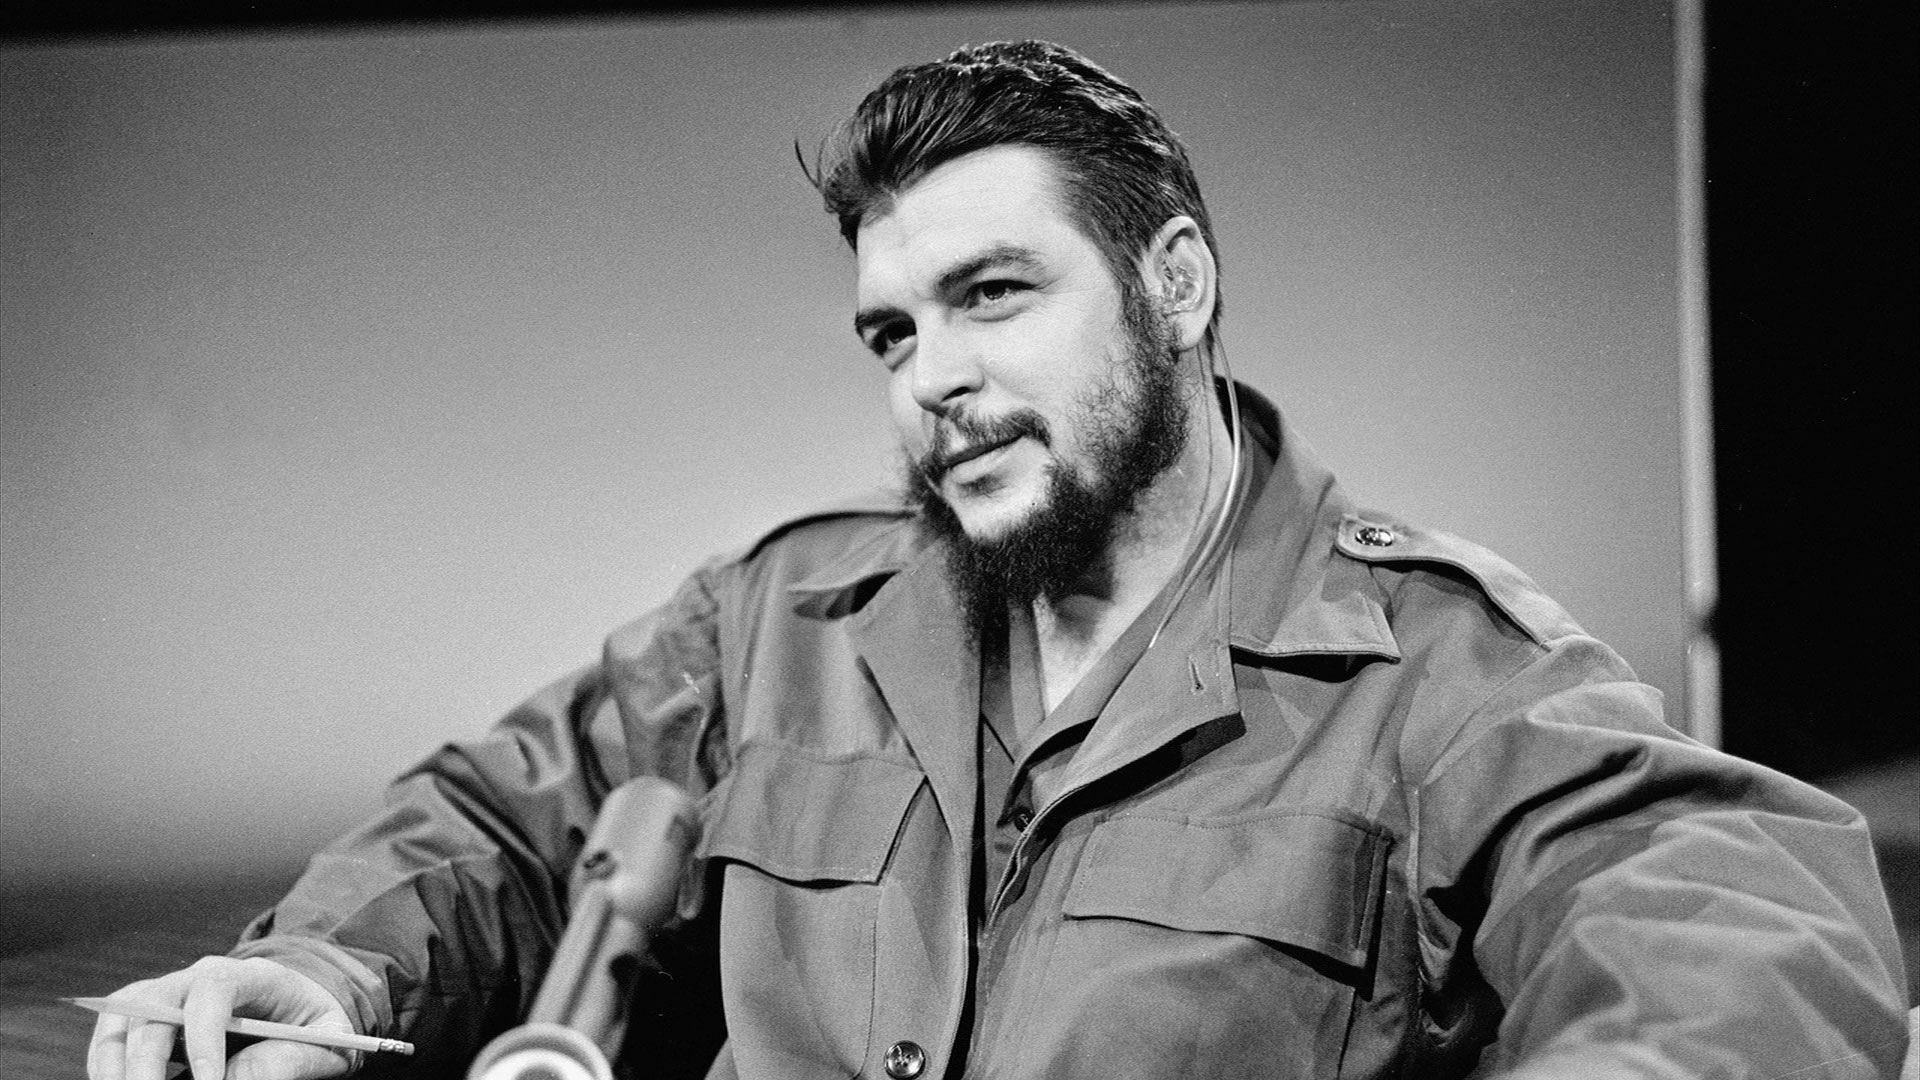 BOLIVIA: BODY OF CHE GUEVARA IS DISCOVERED 